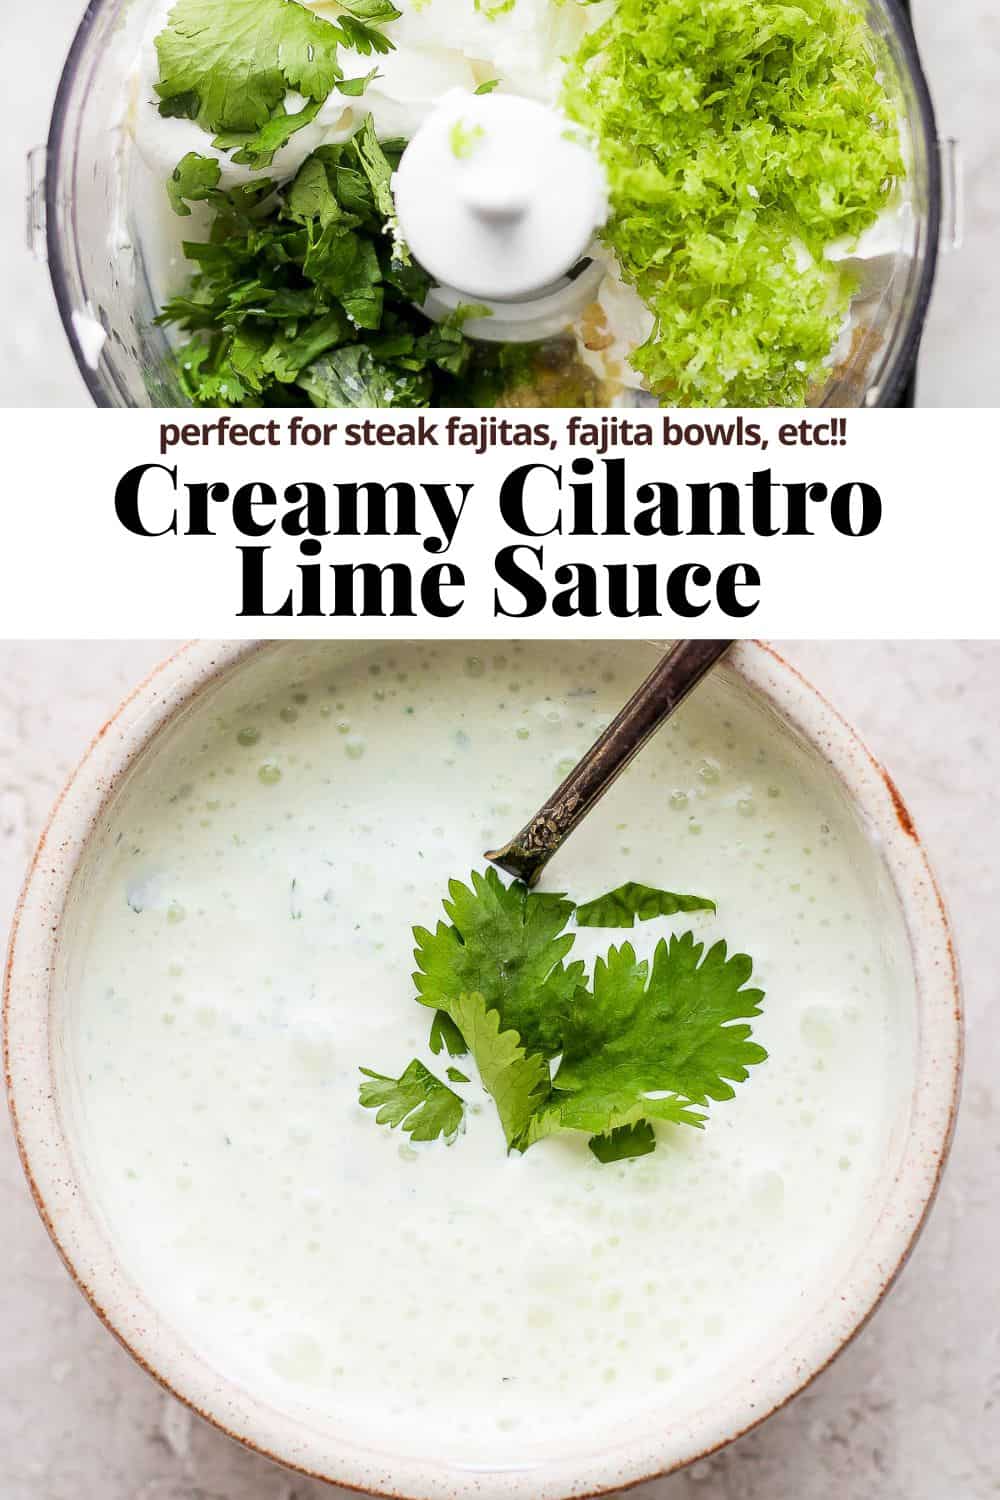 Pinterest image showing the ingredients in the food processor, the recipe title, and then the finished cilantro lime sauce in a bowl.